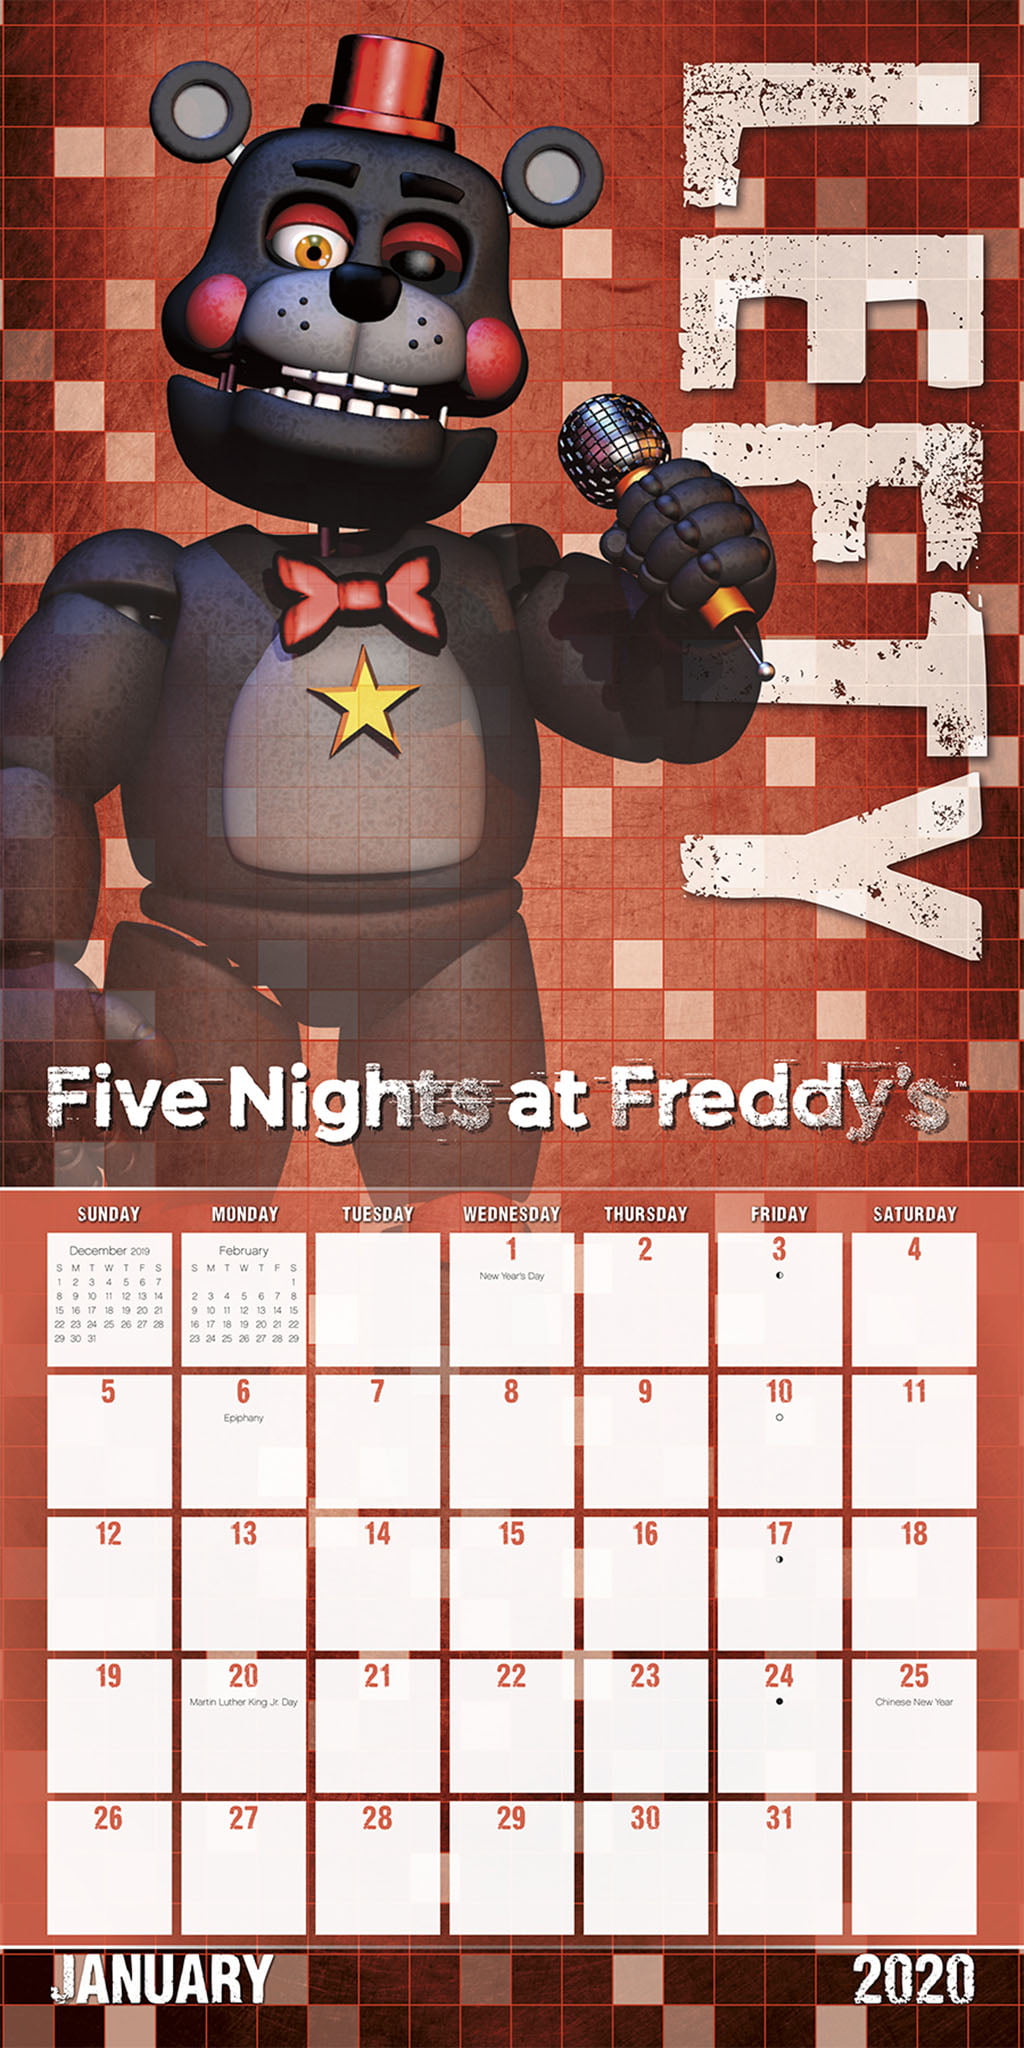 Five Nights at Freddys Gifts, Office Supplies Five Nights at Freddys Calendar 2020 Set Deluxe 2020 Five Nights at Freddys Mini Calendar with Over 100 Calendar Stickers